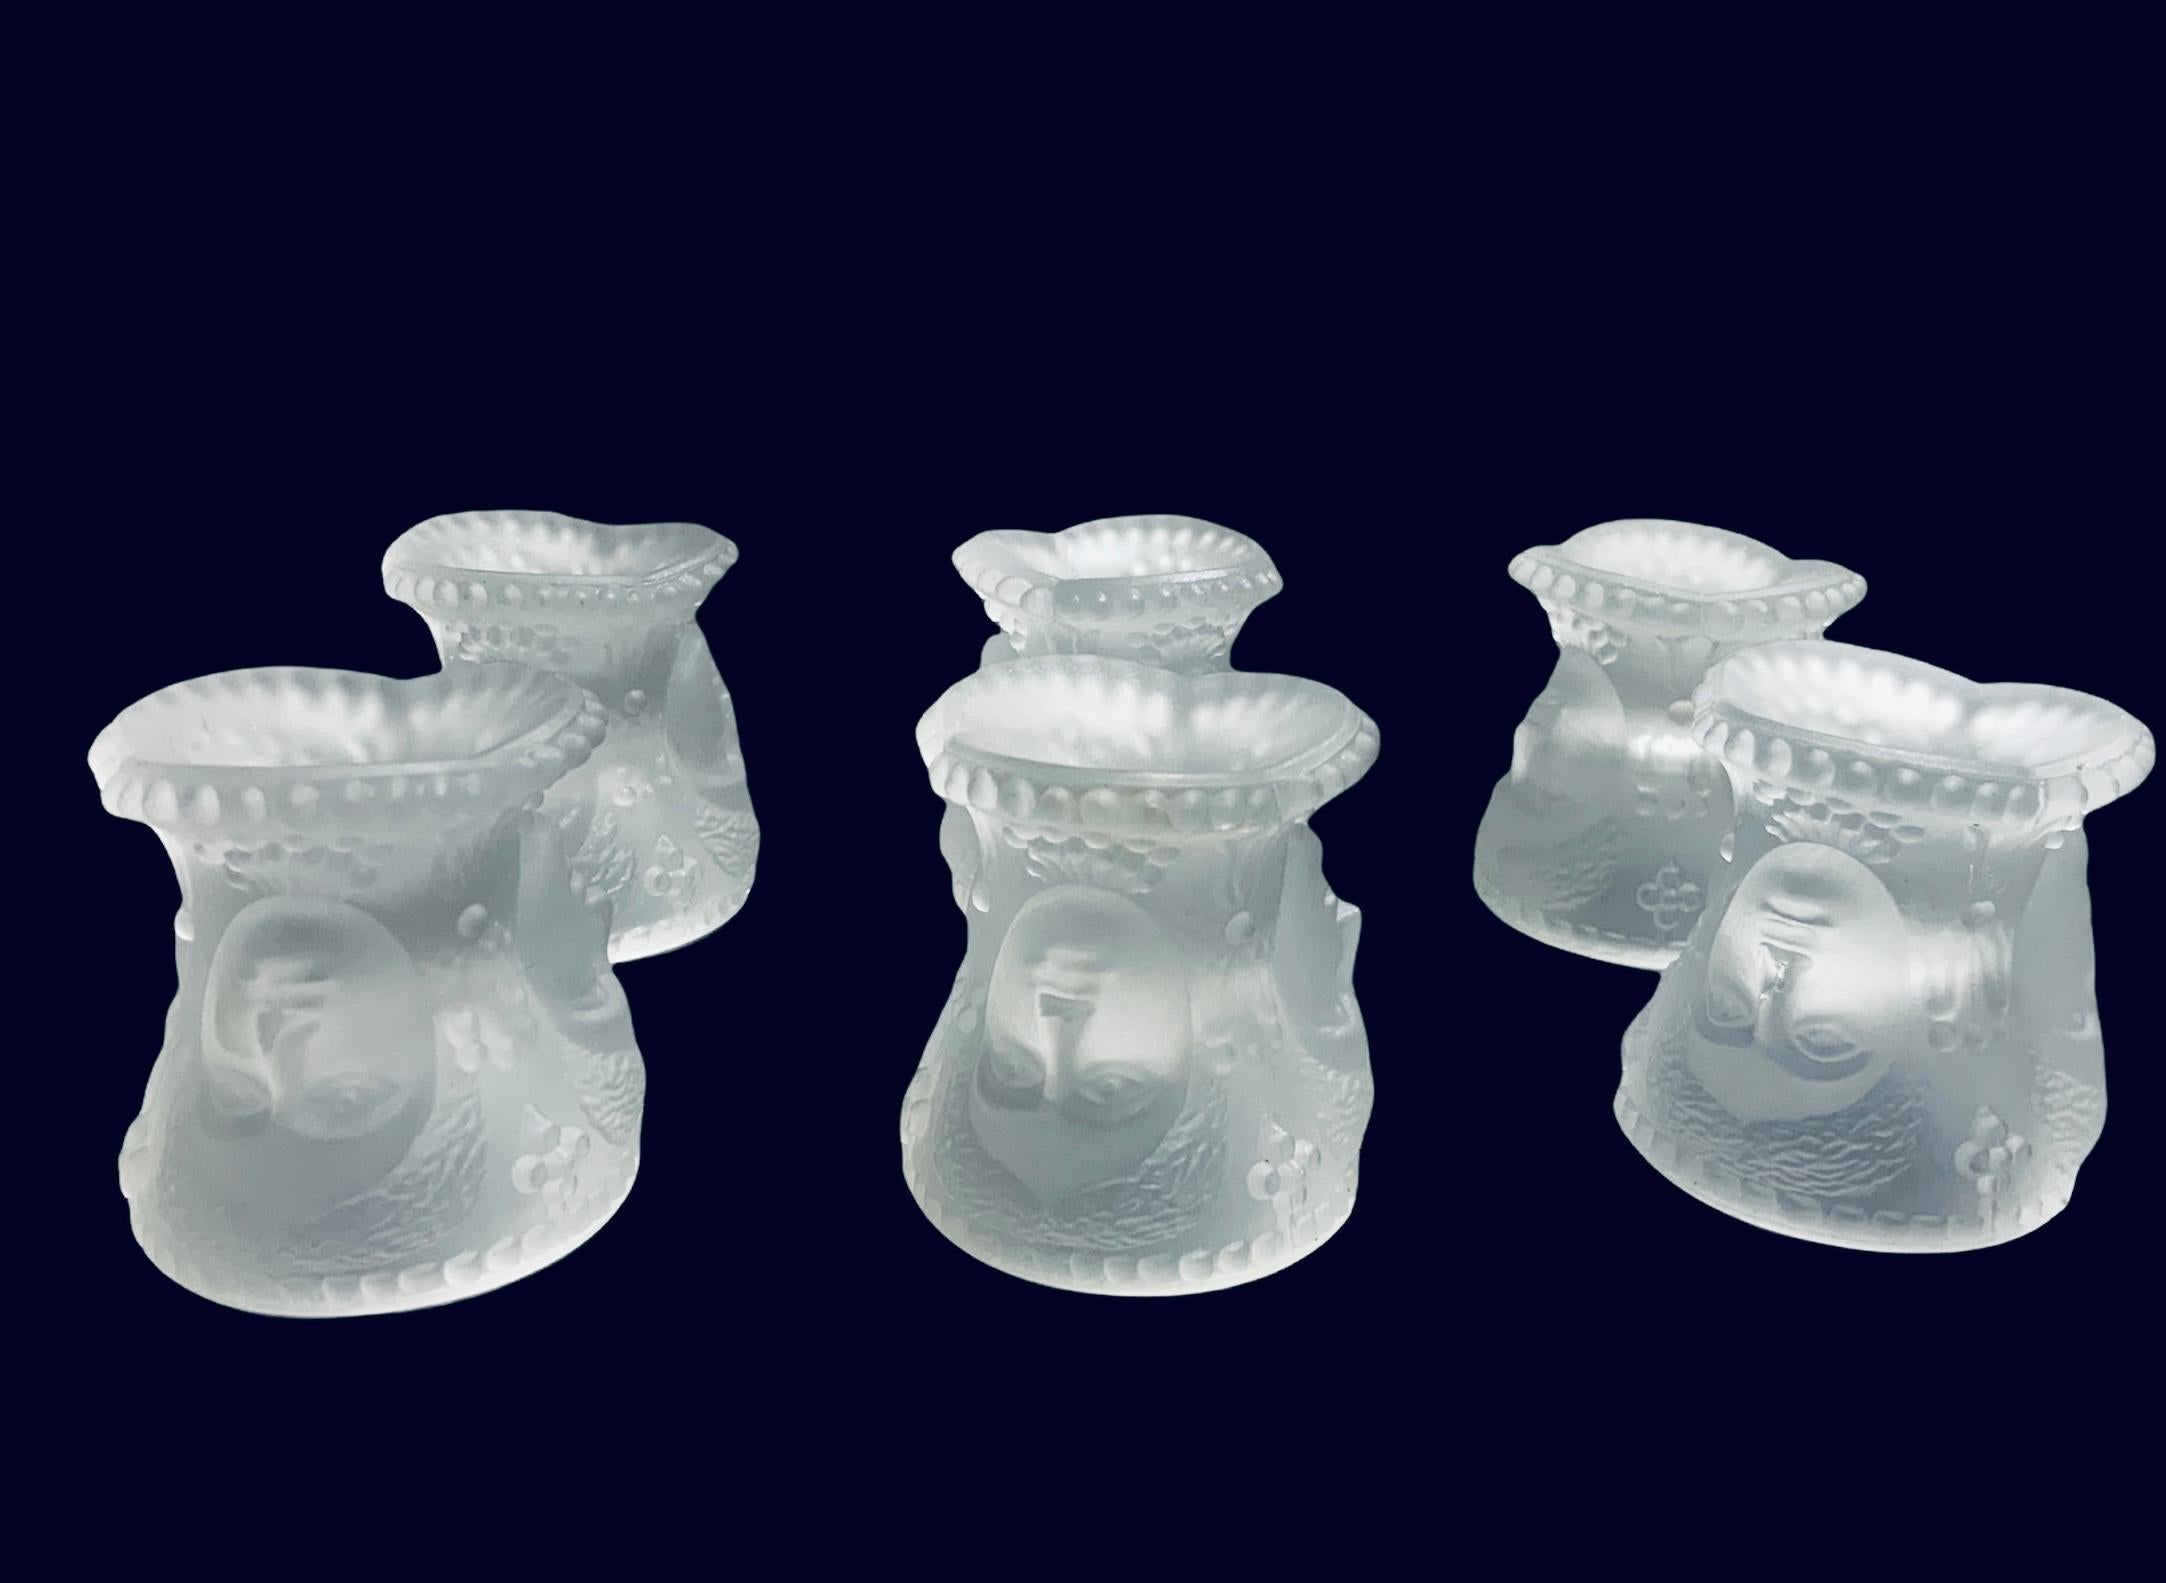 This a L.G. Wright Glass Co. Set of six frosted glass Three Faces Salt Cellars. They depict the same face three times of a woman/goddess whose head has a lot of wavy hair and is adorned with flowers at each side. It also appears that she has some